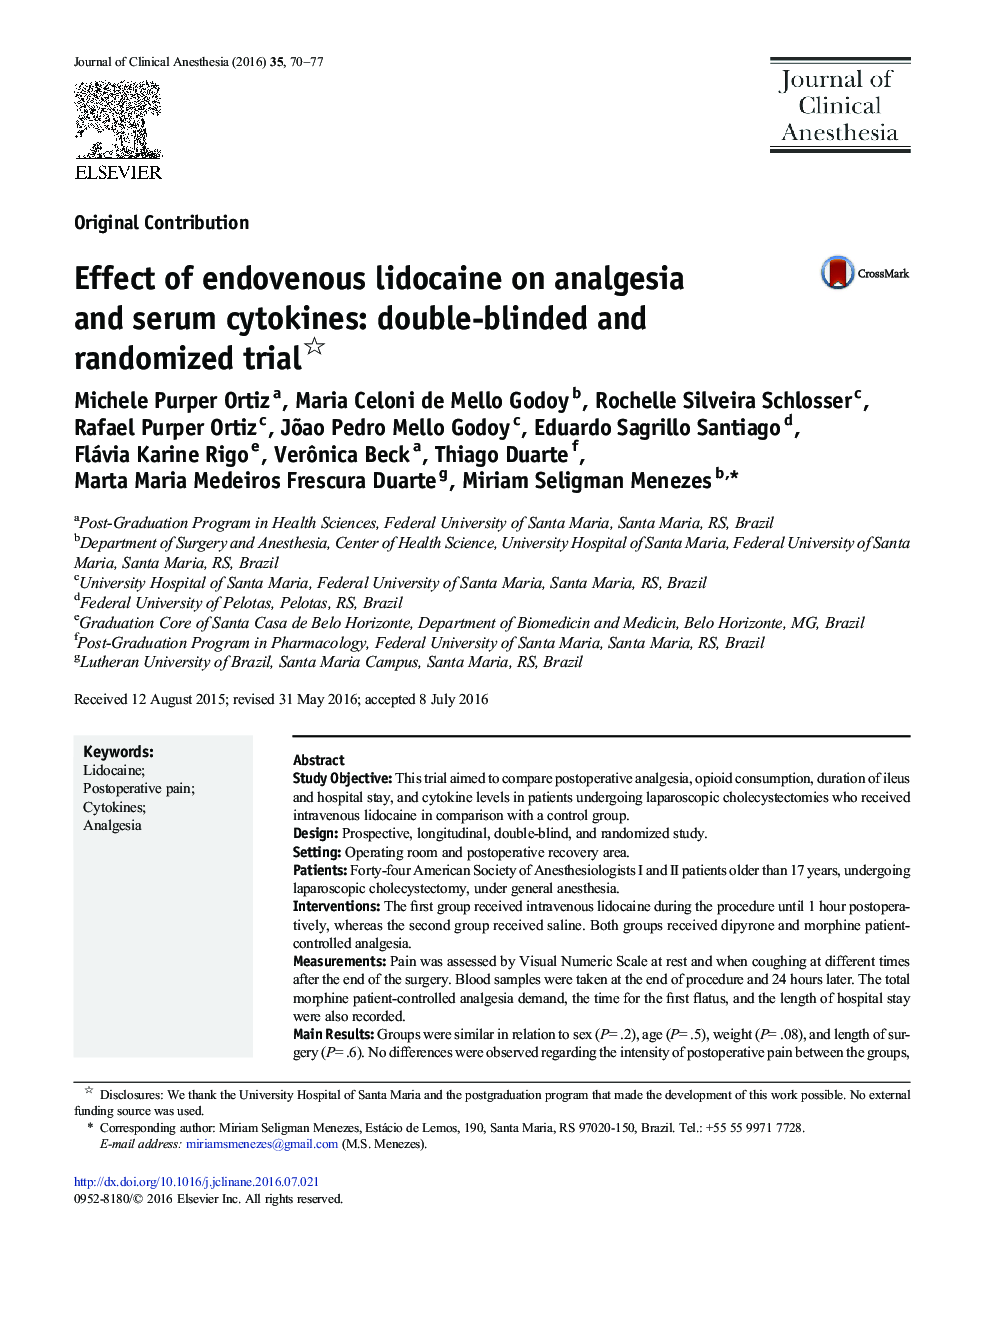 Original ContributionEffect of endovenous lidocaine on analgesia and serum cytokines: double-blinded and randomized trial